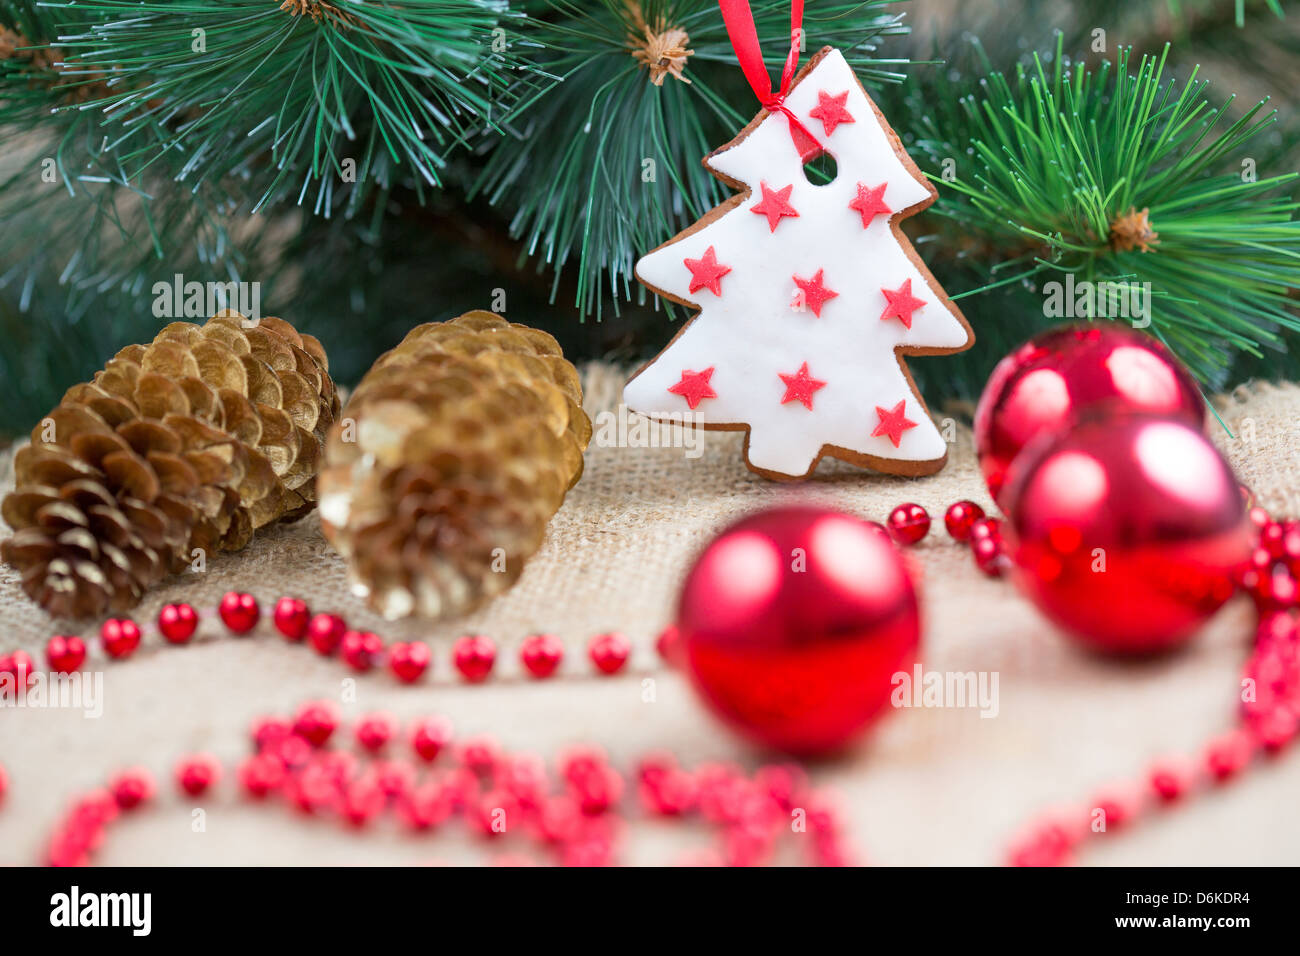 Christmas tree with baubles and cake Stock Photo